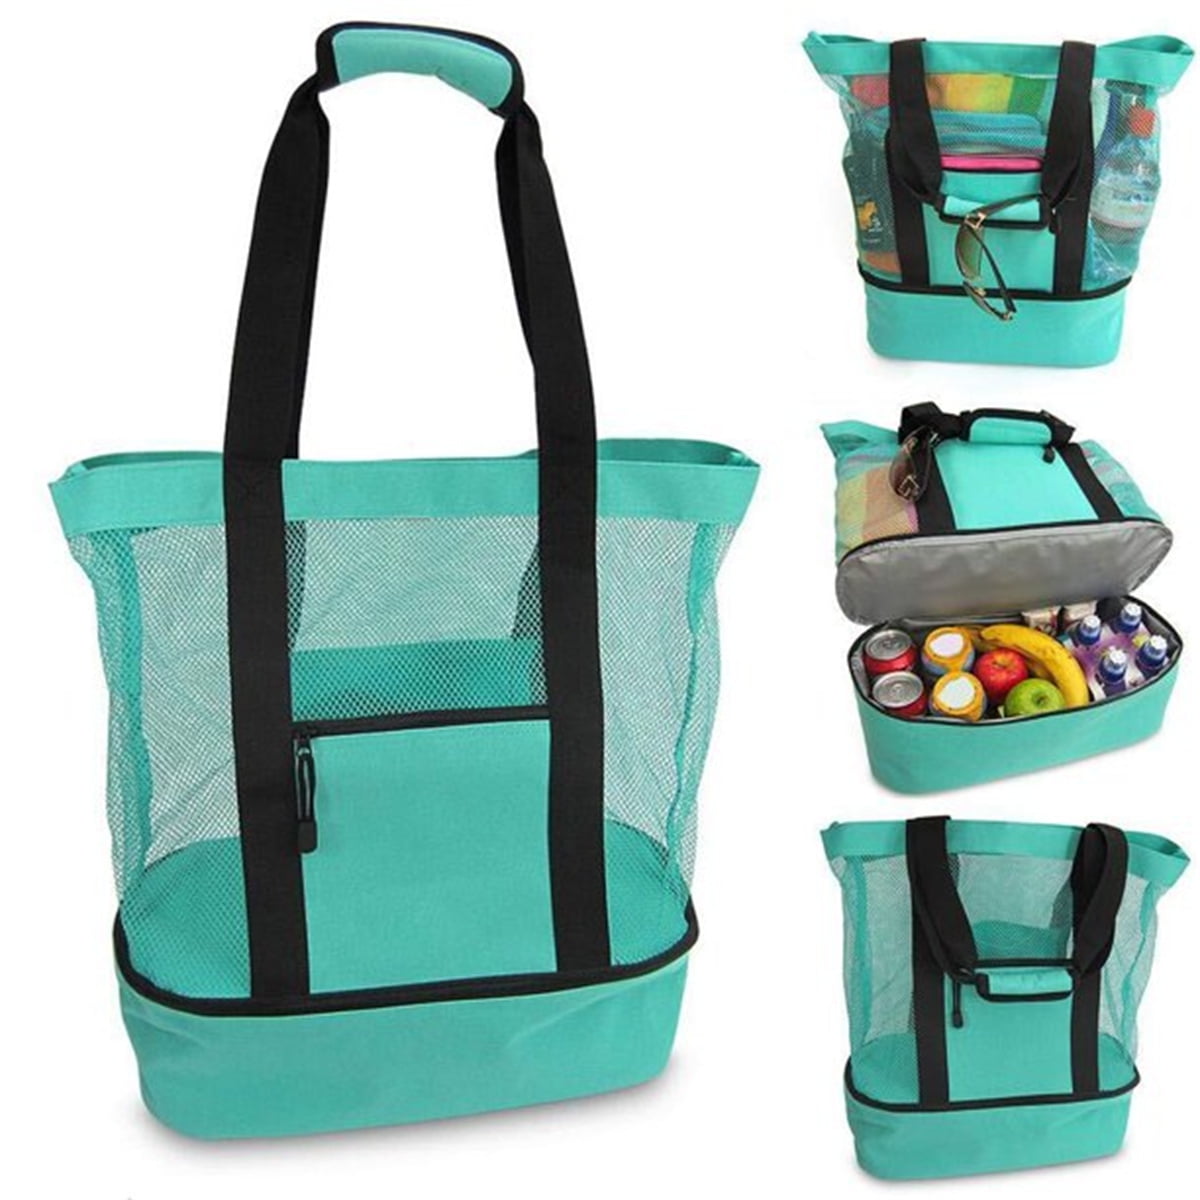 Minicloss Beach Tote Bag Large Pool Bag with Zipper and Pockets for ...